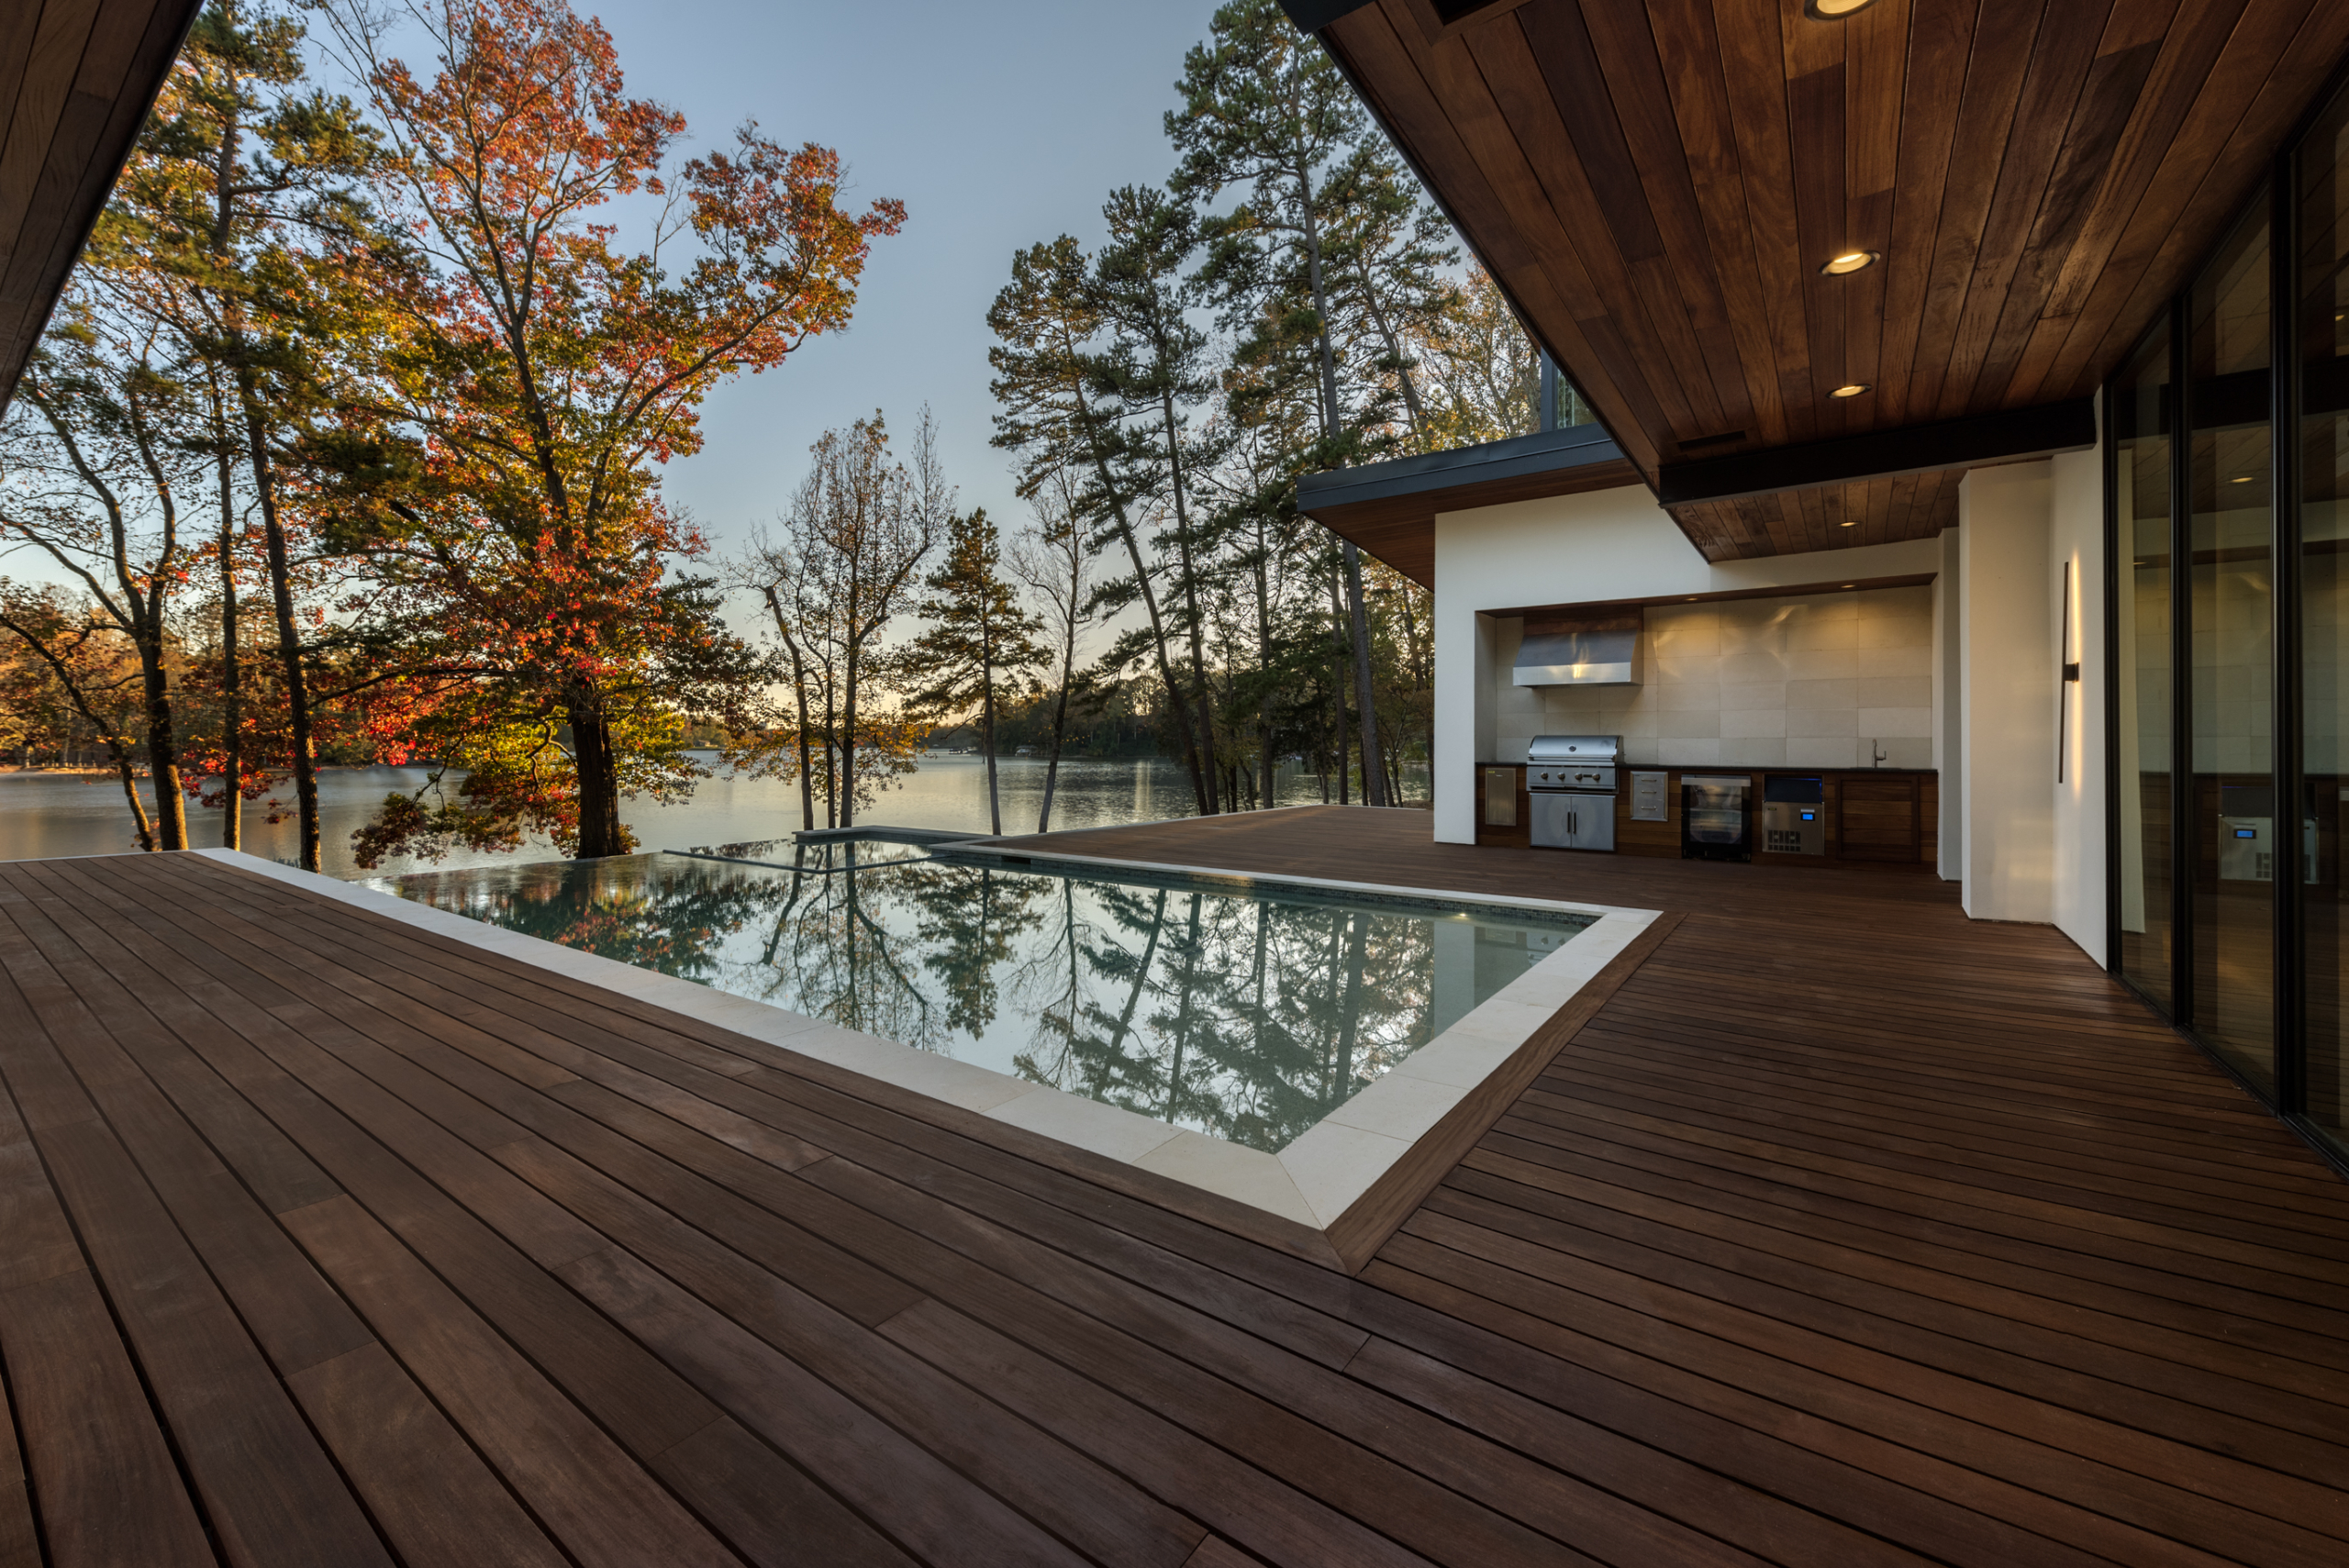 Cumaru wood deck and custom heated pool with infinity edge, oversized spa, tanning ledge and LED lighting package, outdoor kitchen, pebble plaster finish and limestone coping during day